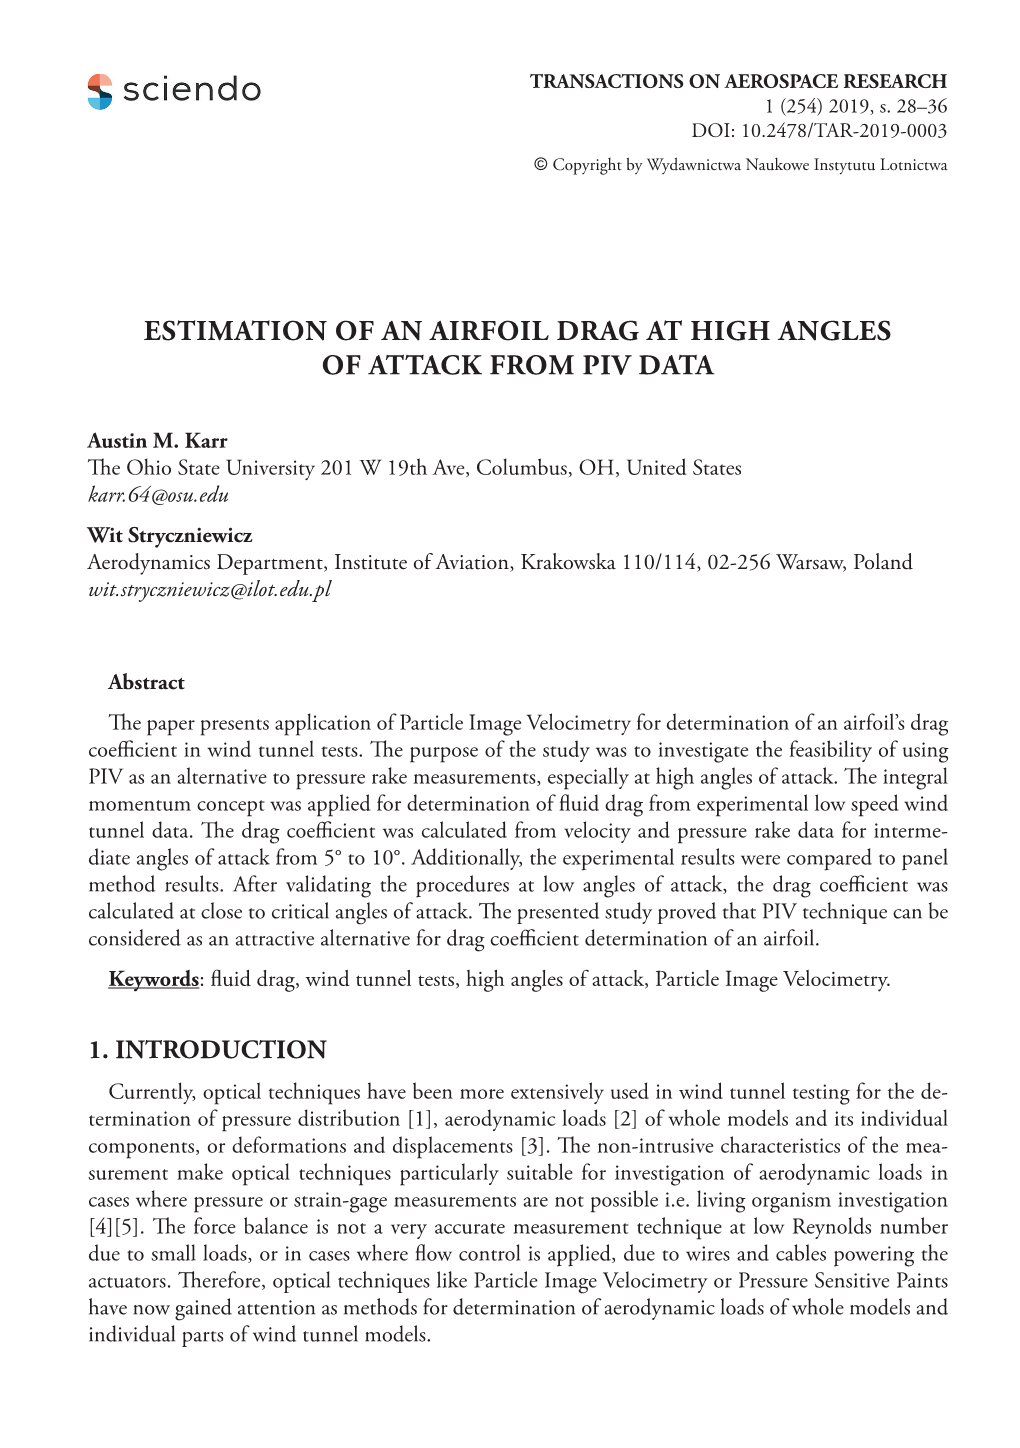 Estimation of an Airfoil Drag at High Angles of Attack from Piv Data